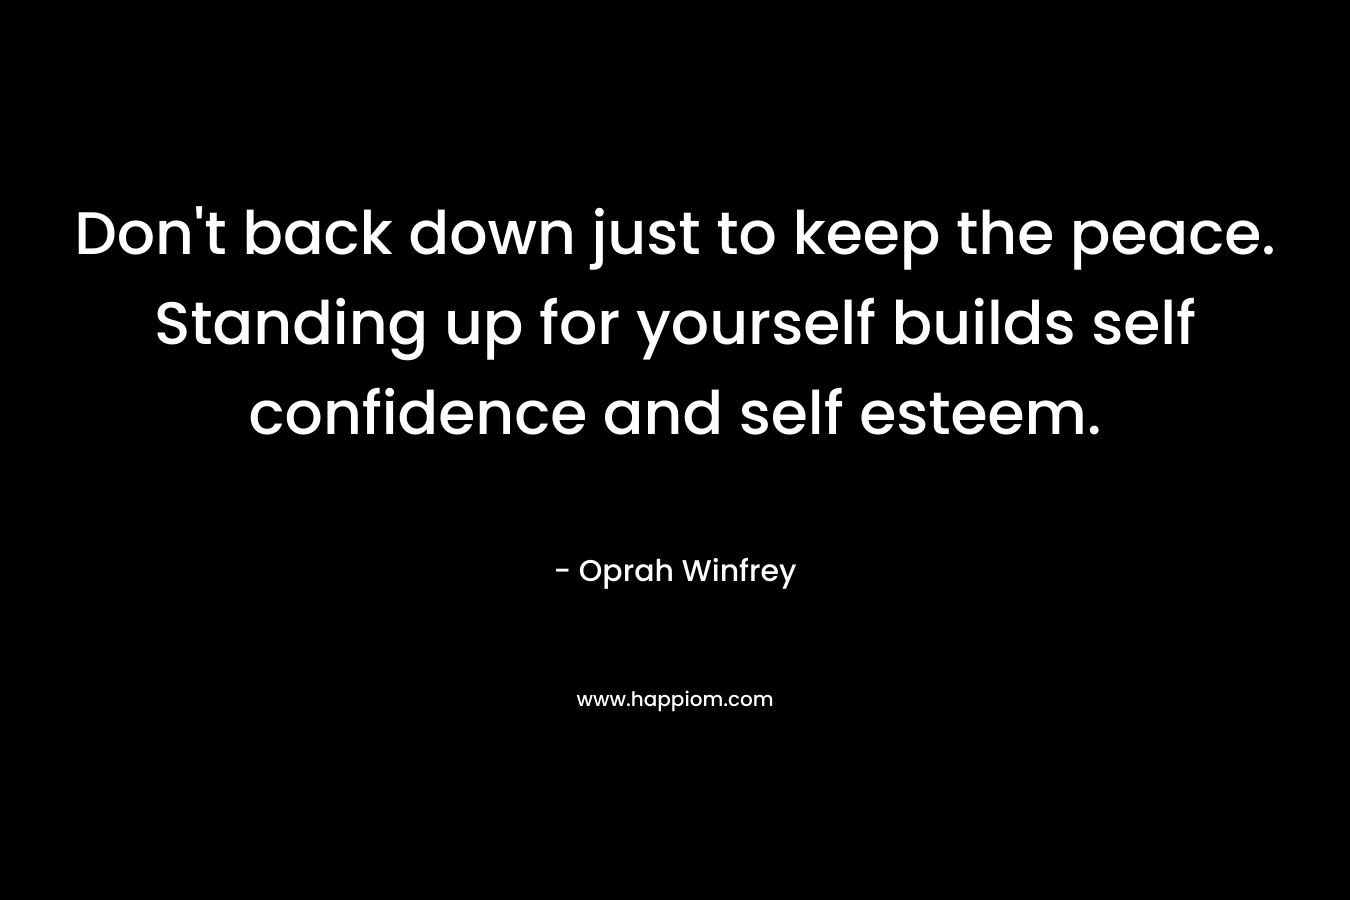 Don't back down just to keep the peace. Standing up for yourself builds self confidence and self esteem.